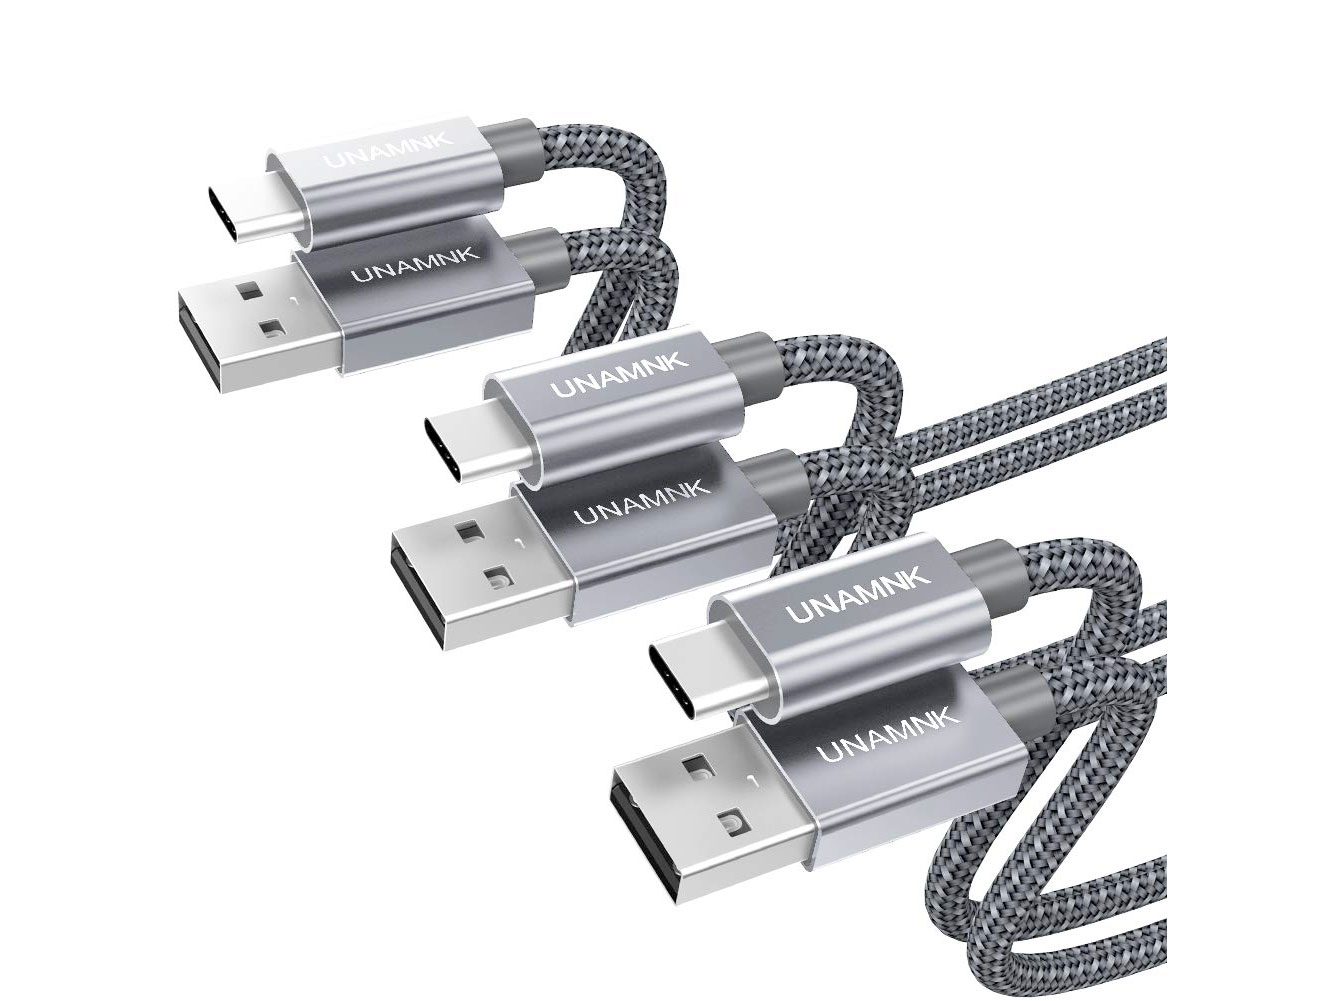 Amazon：USB A to USB C Cable (3 Pack)只賣$5.94